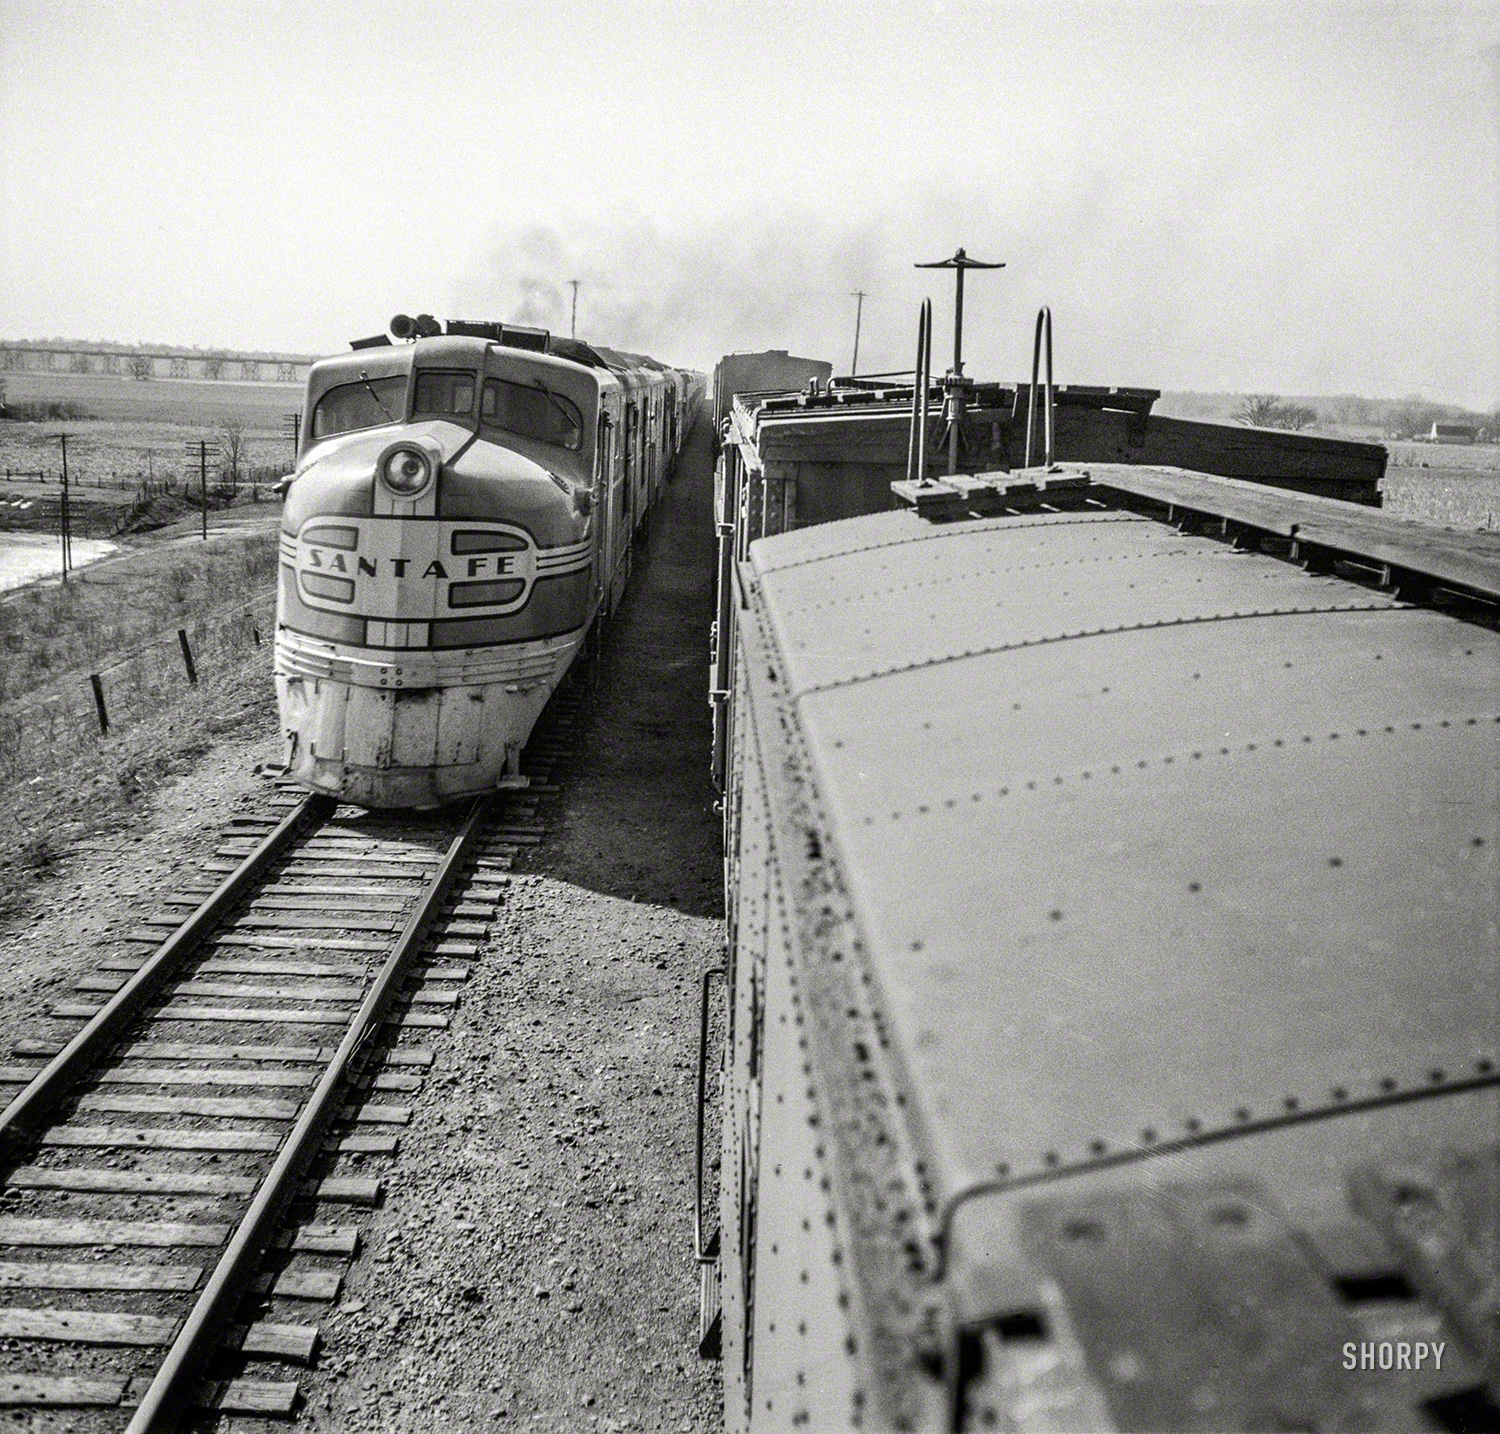 March 1943. "Sibley, Missouri. Passing one of the diesel passenger locomotives of the Atchison, Topeka and Santa Fe." Medium format nitrate negative by Jack Delano for the Office of War Information. View full size.